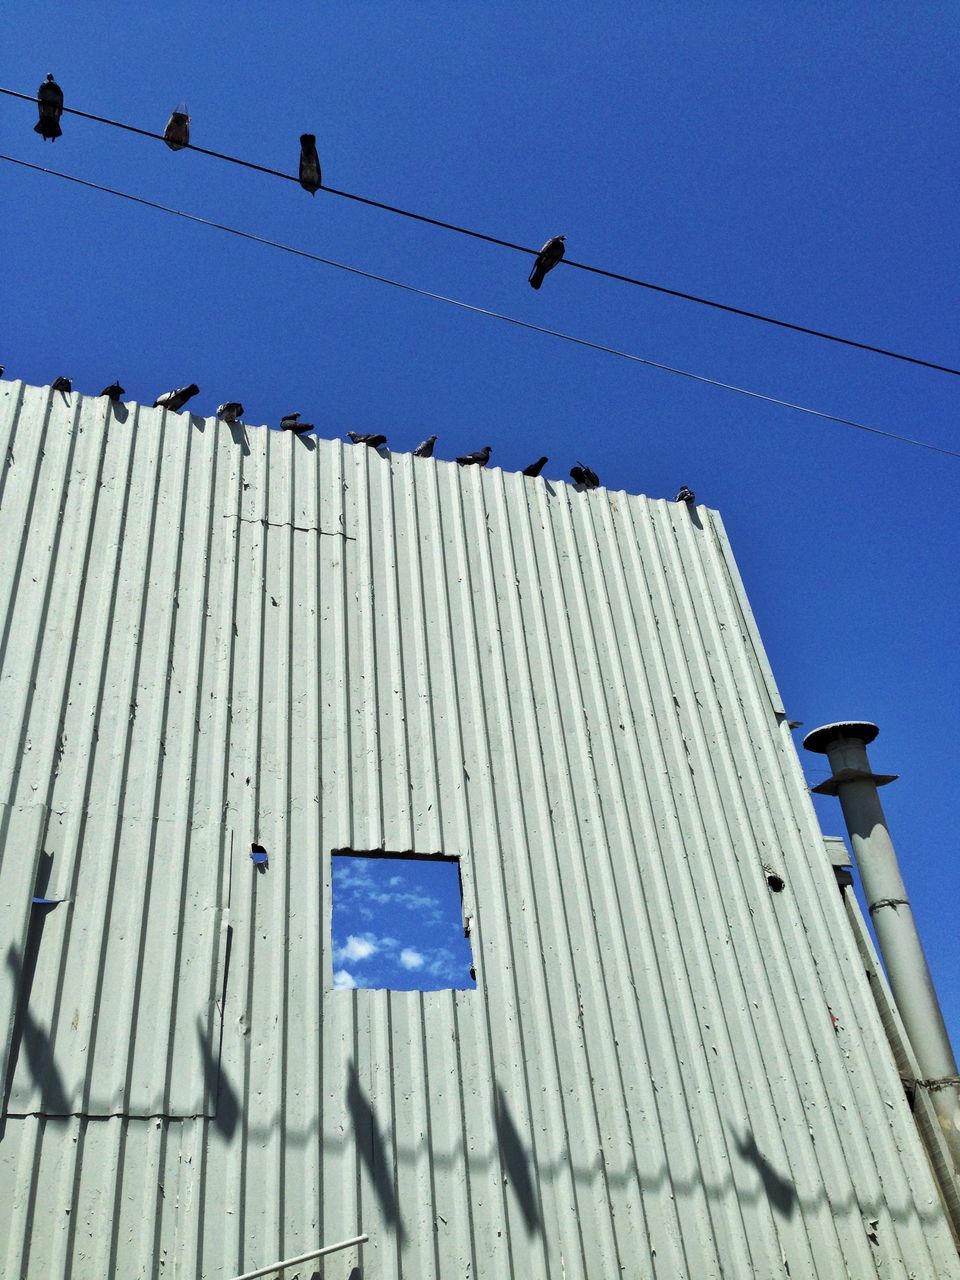 bird, low angle view, animal themes, clear sky, animals in the wild, wildlife, cable, flock of birds, flying, power line, built structure, building exterior, blue, architecture, sky, perching, in a row, outdoors, electricity